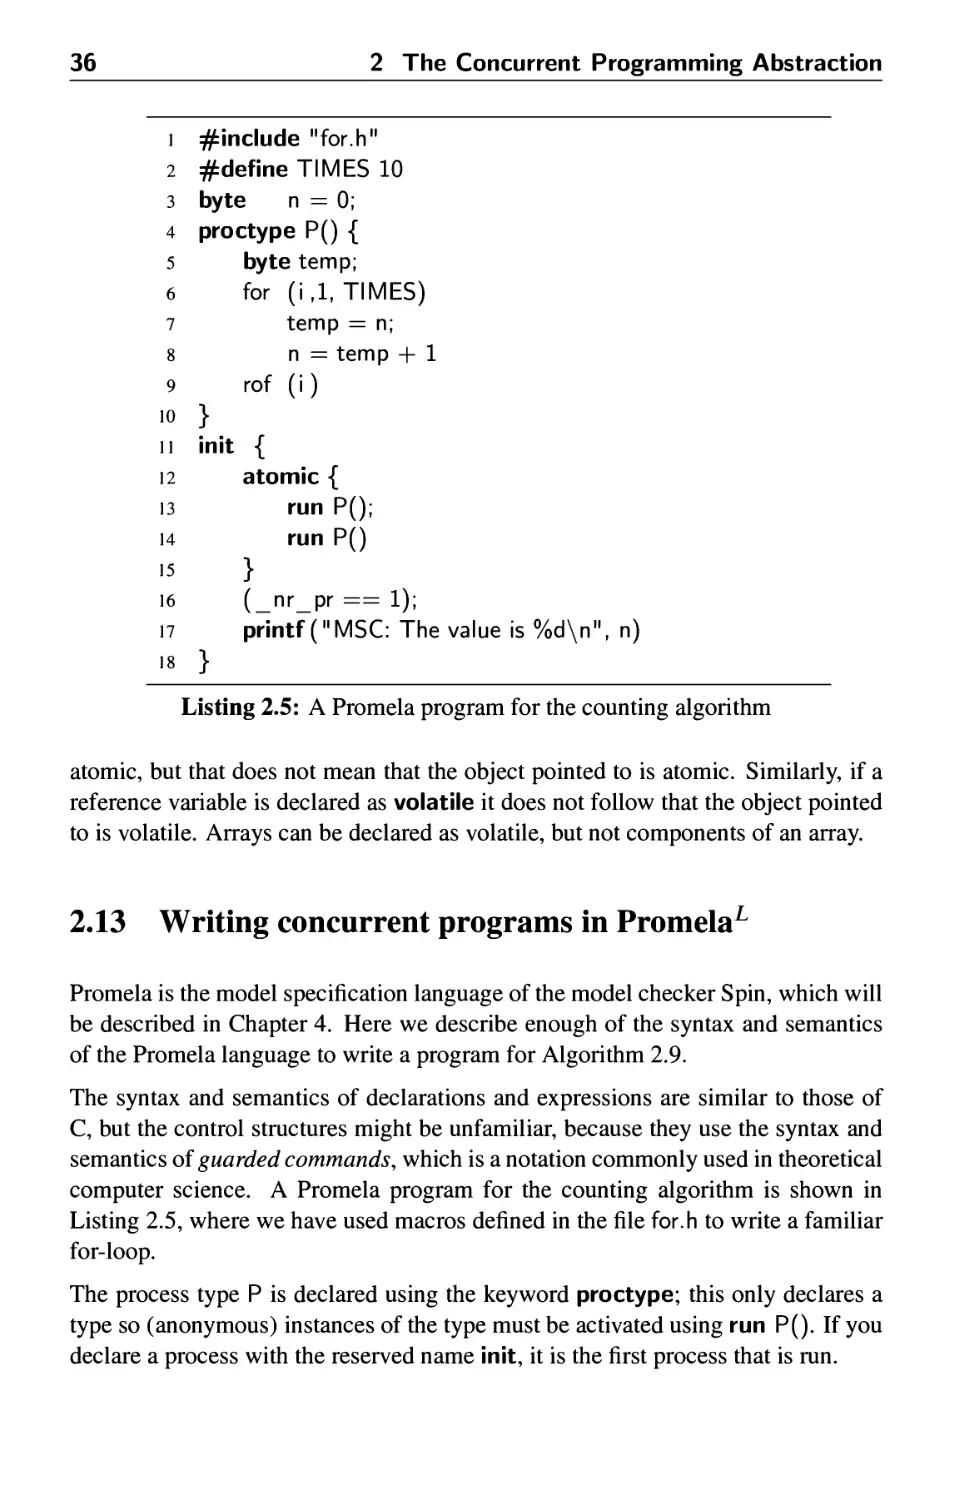 2.13 Writing concurrent programs in Promela